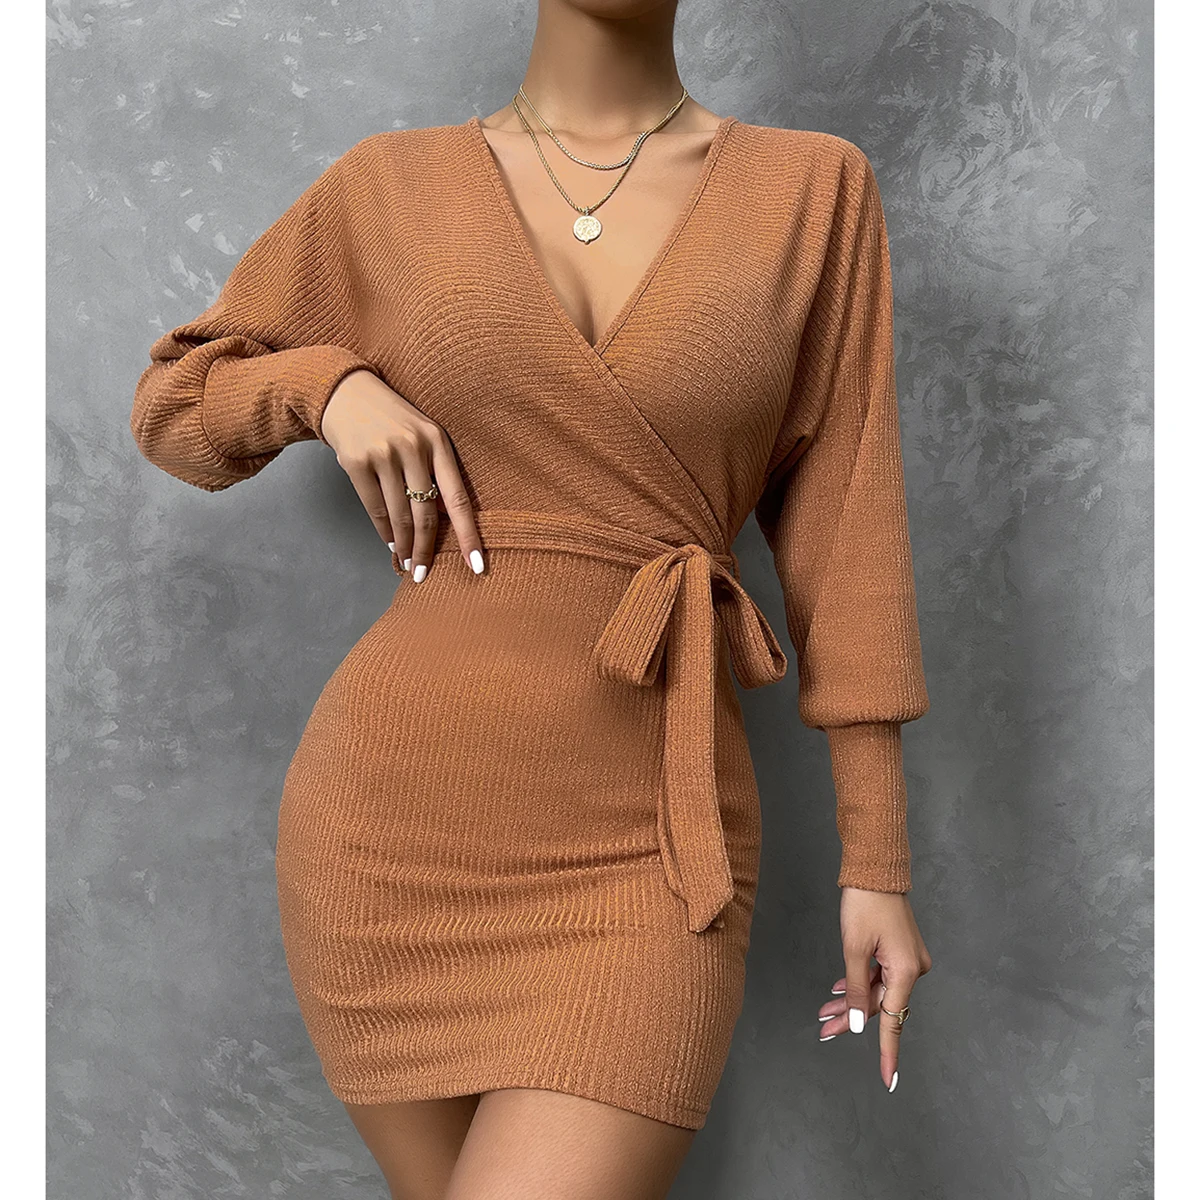 Autumn and winter Sexy V-neck Long Sleeve Women knitted Dress casual solid colour Loose Bandage Dresses Knitwear Maxi Vestito